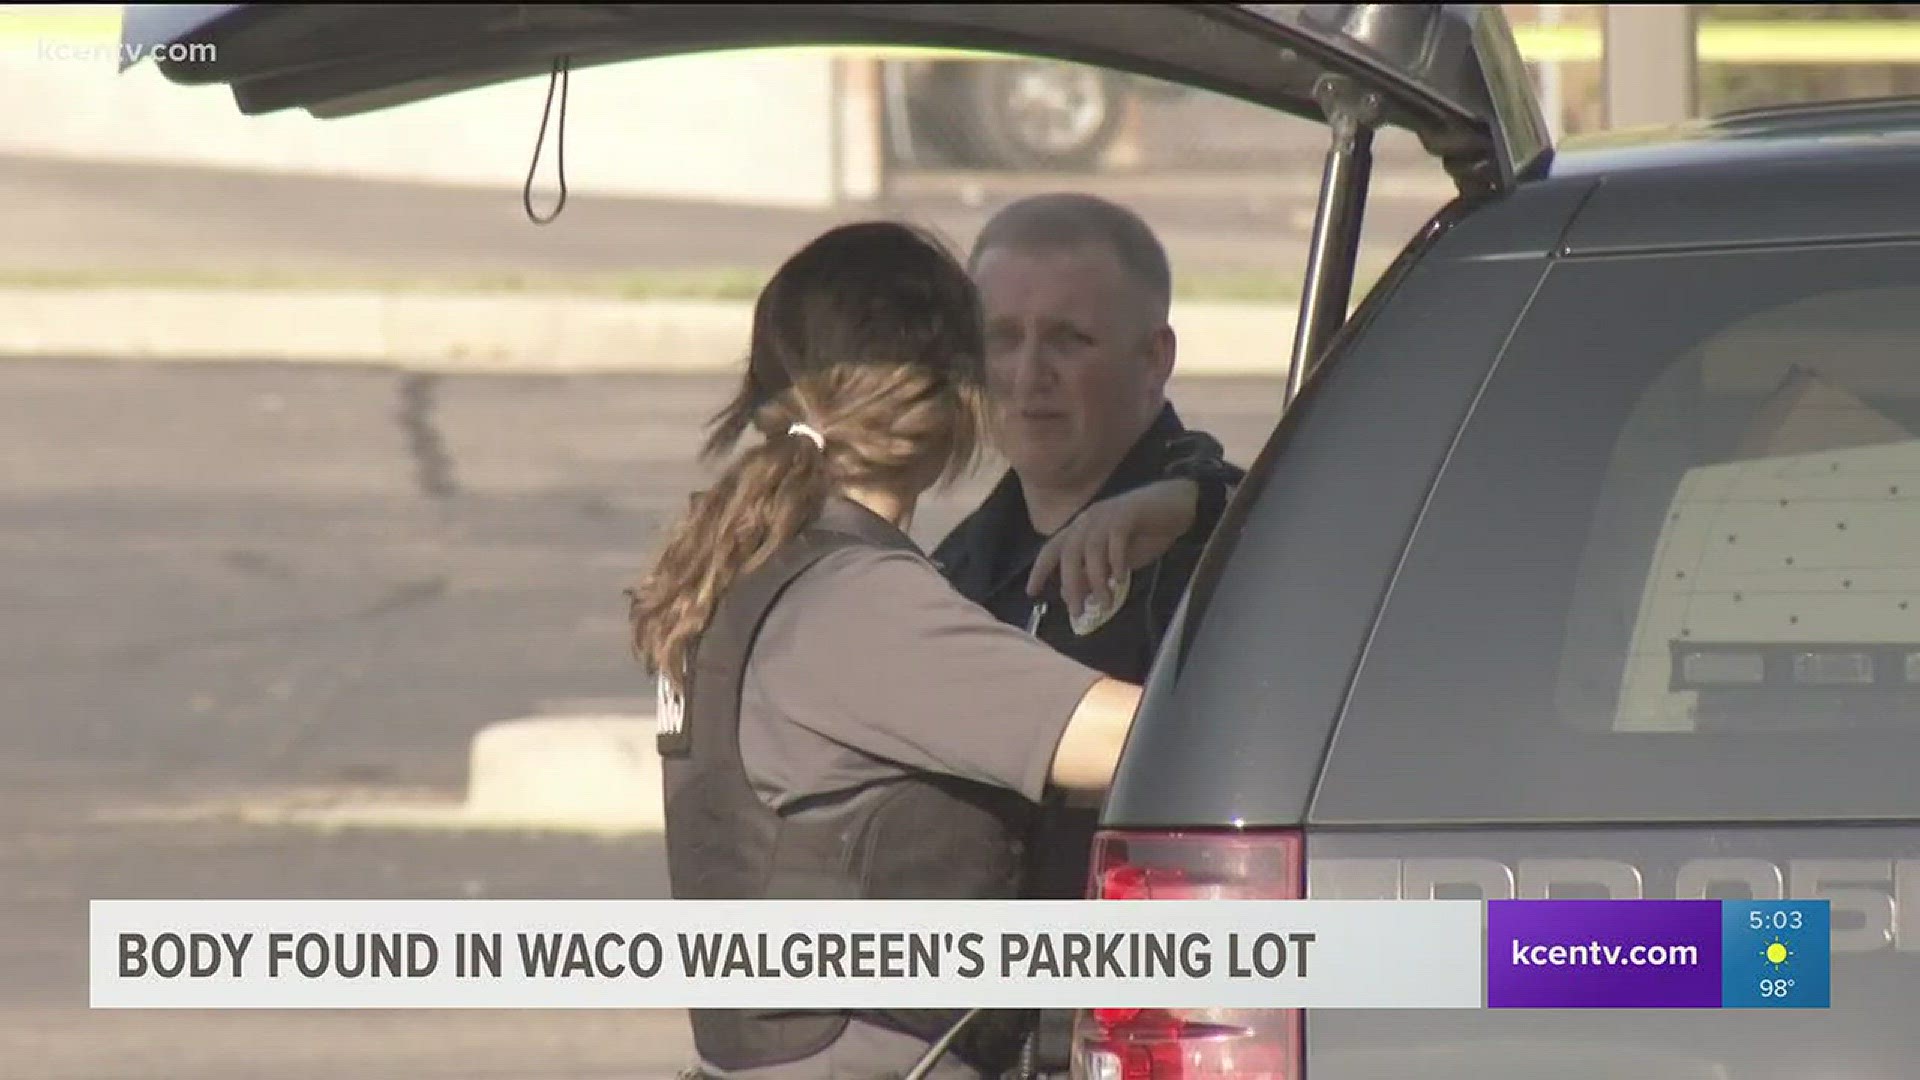 Police are investigating a suspicious death in a Walgreens parking lot.